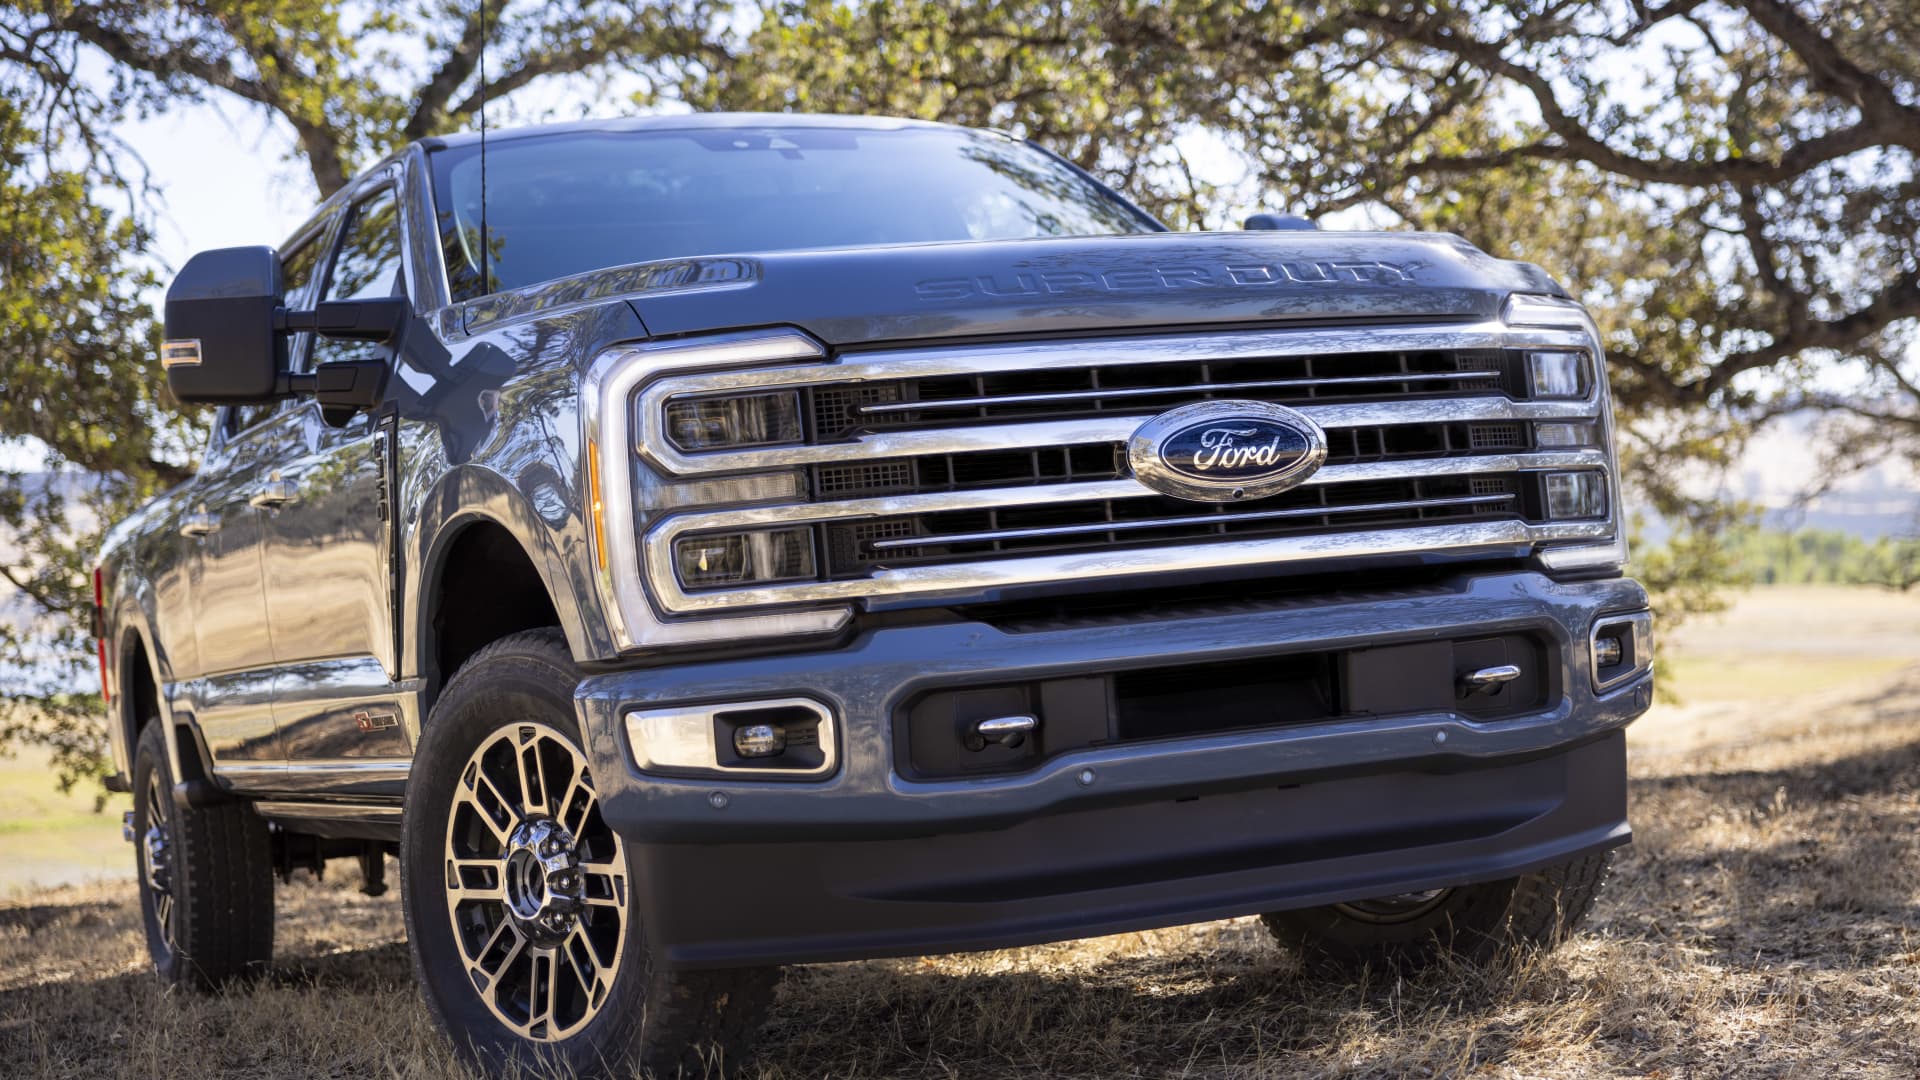 Ford unveils new F-Series Super Duty trucks designed to boost its commercial, software services businesses